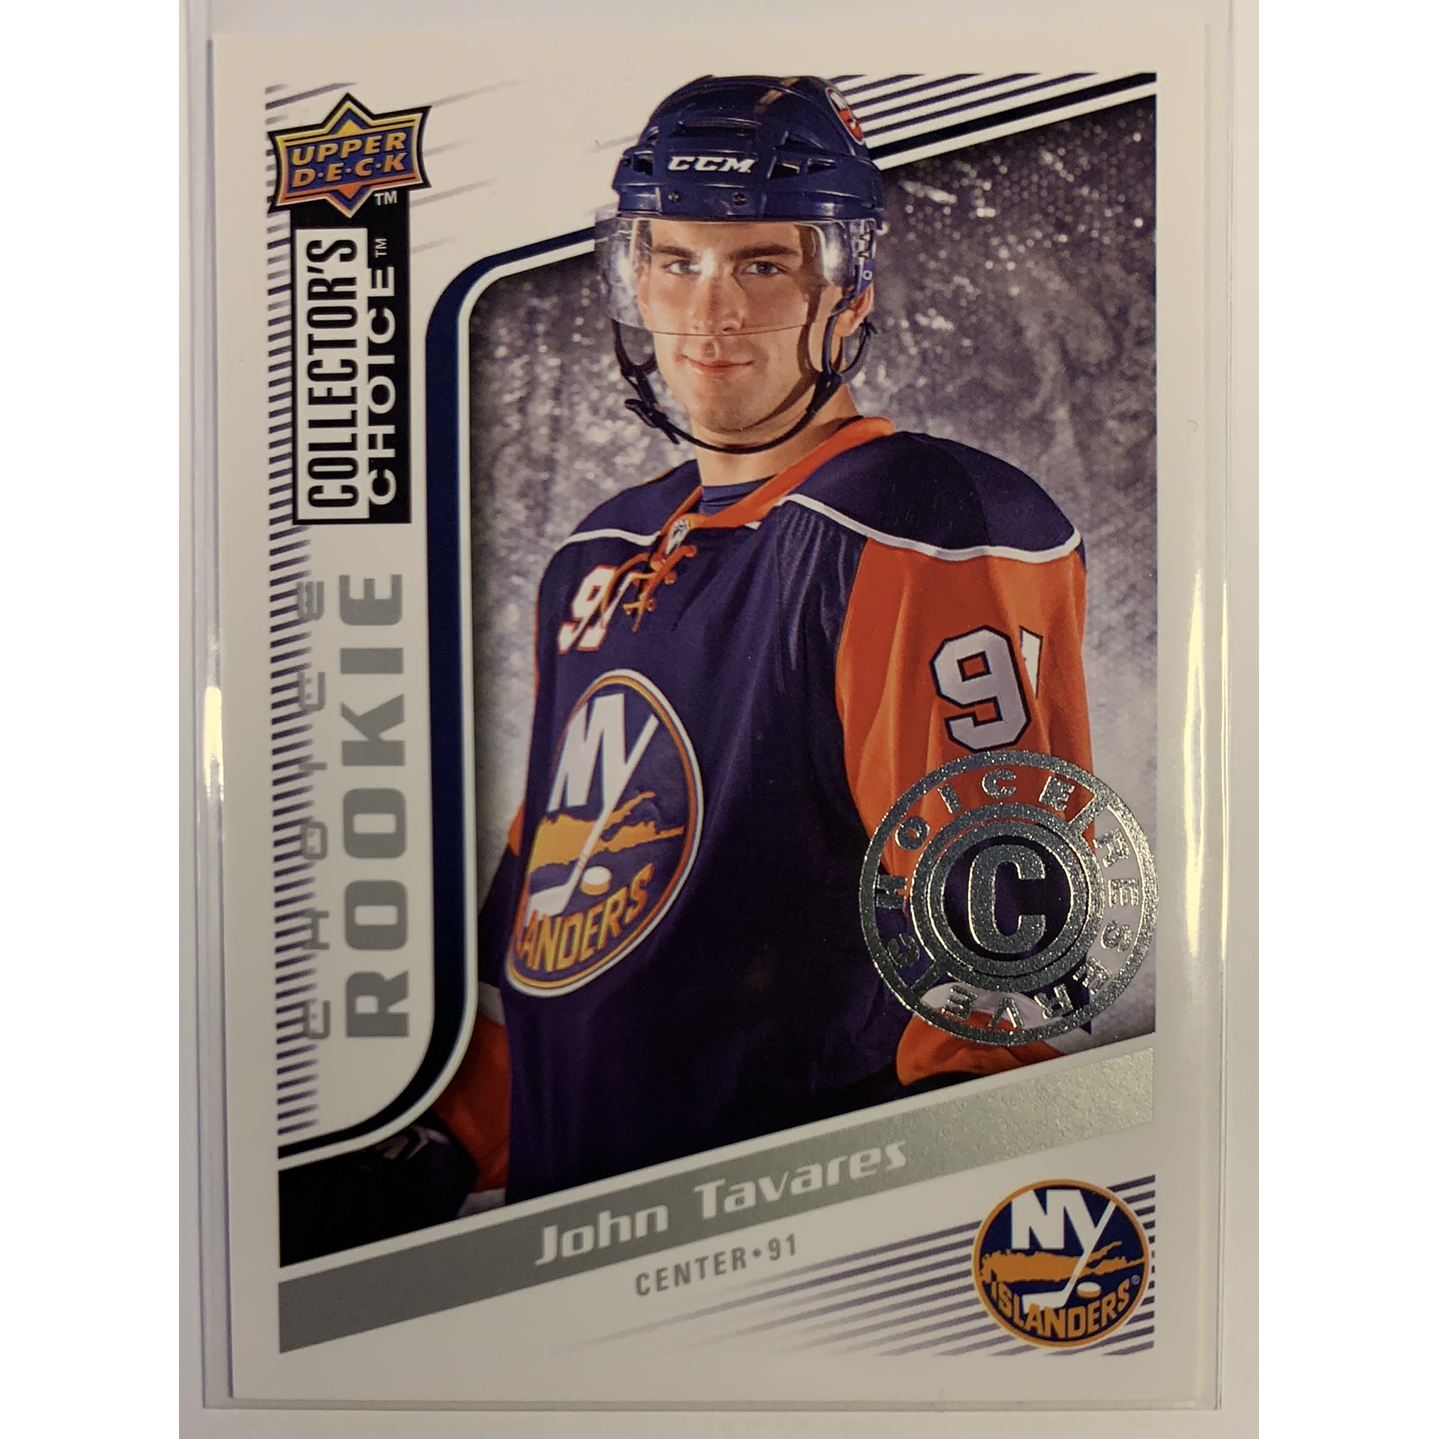  2009-10 Upper Deck Collectors Choice John Tavares Choice Rookie Reserve Print  Local Legends Cards & Collectibles